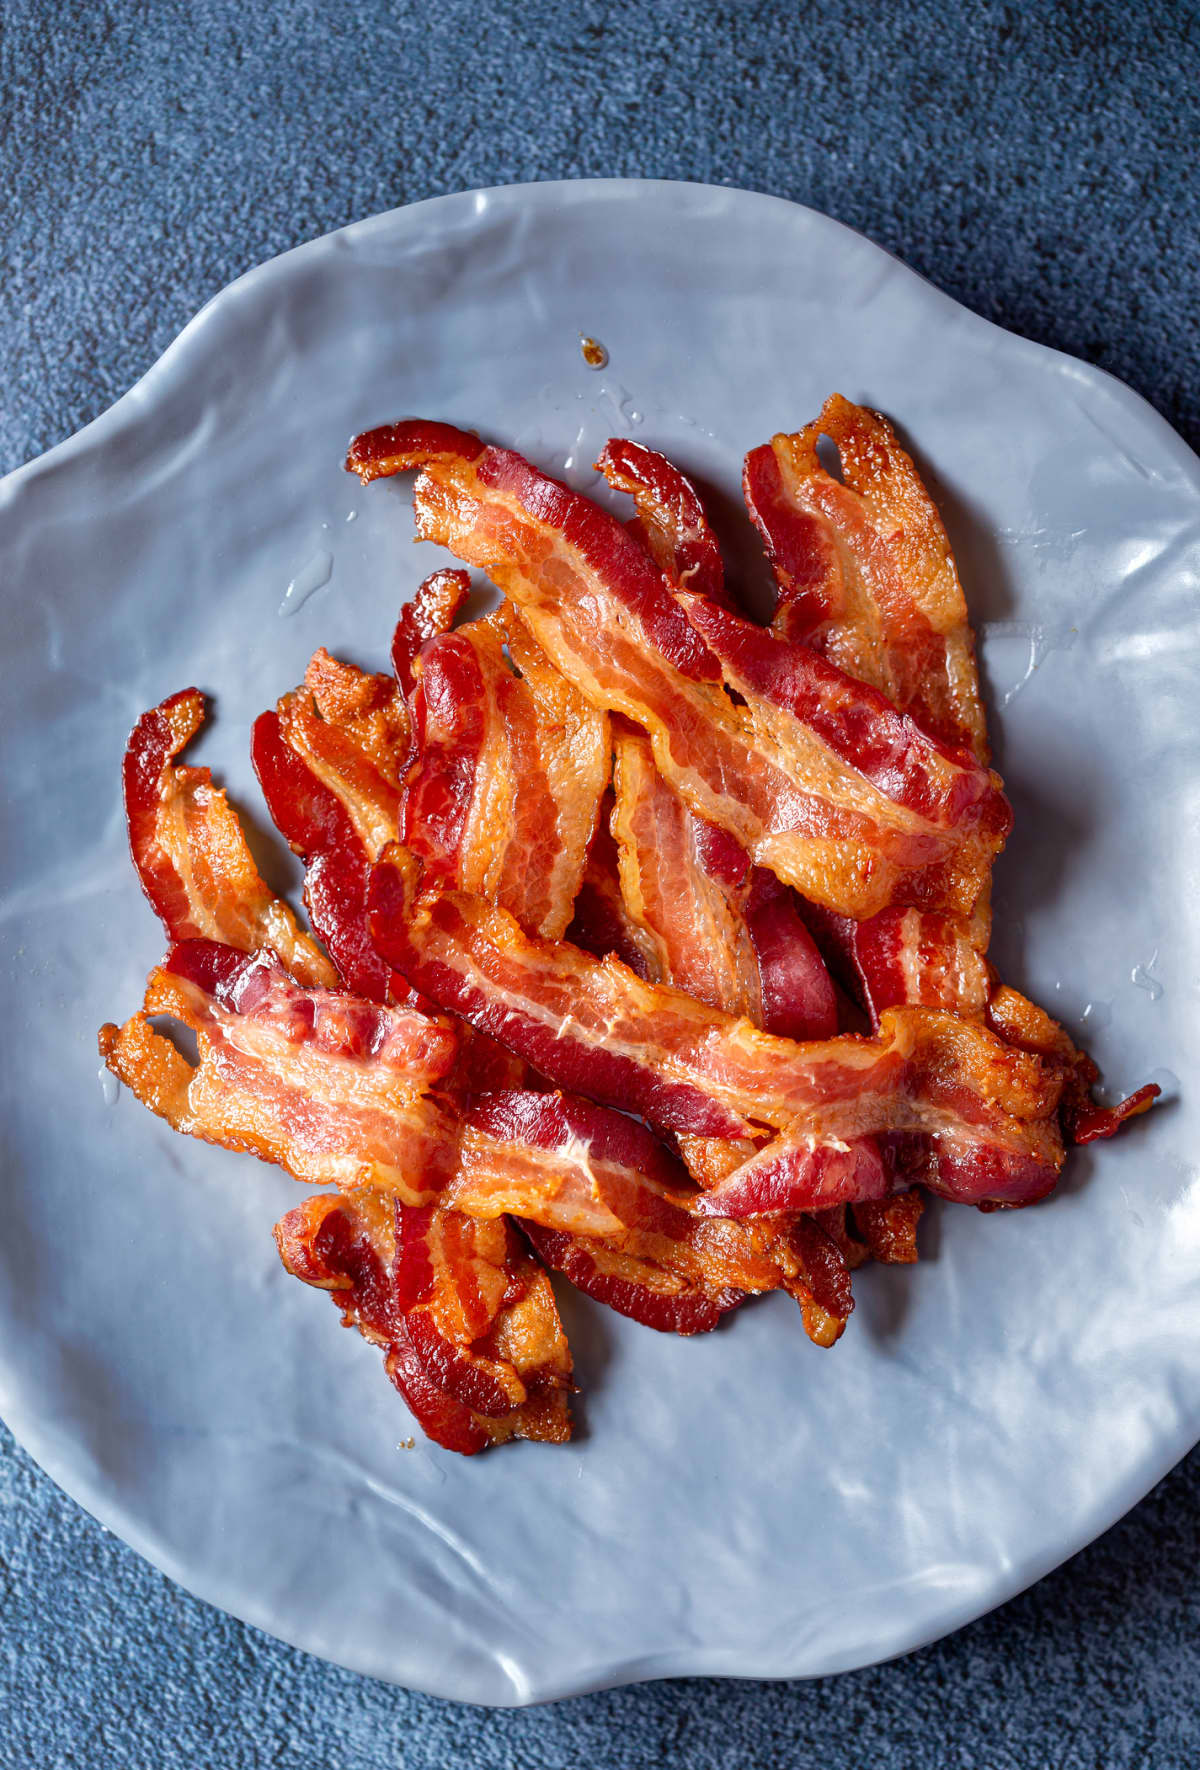 A pile of bacon on a plate